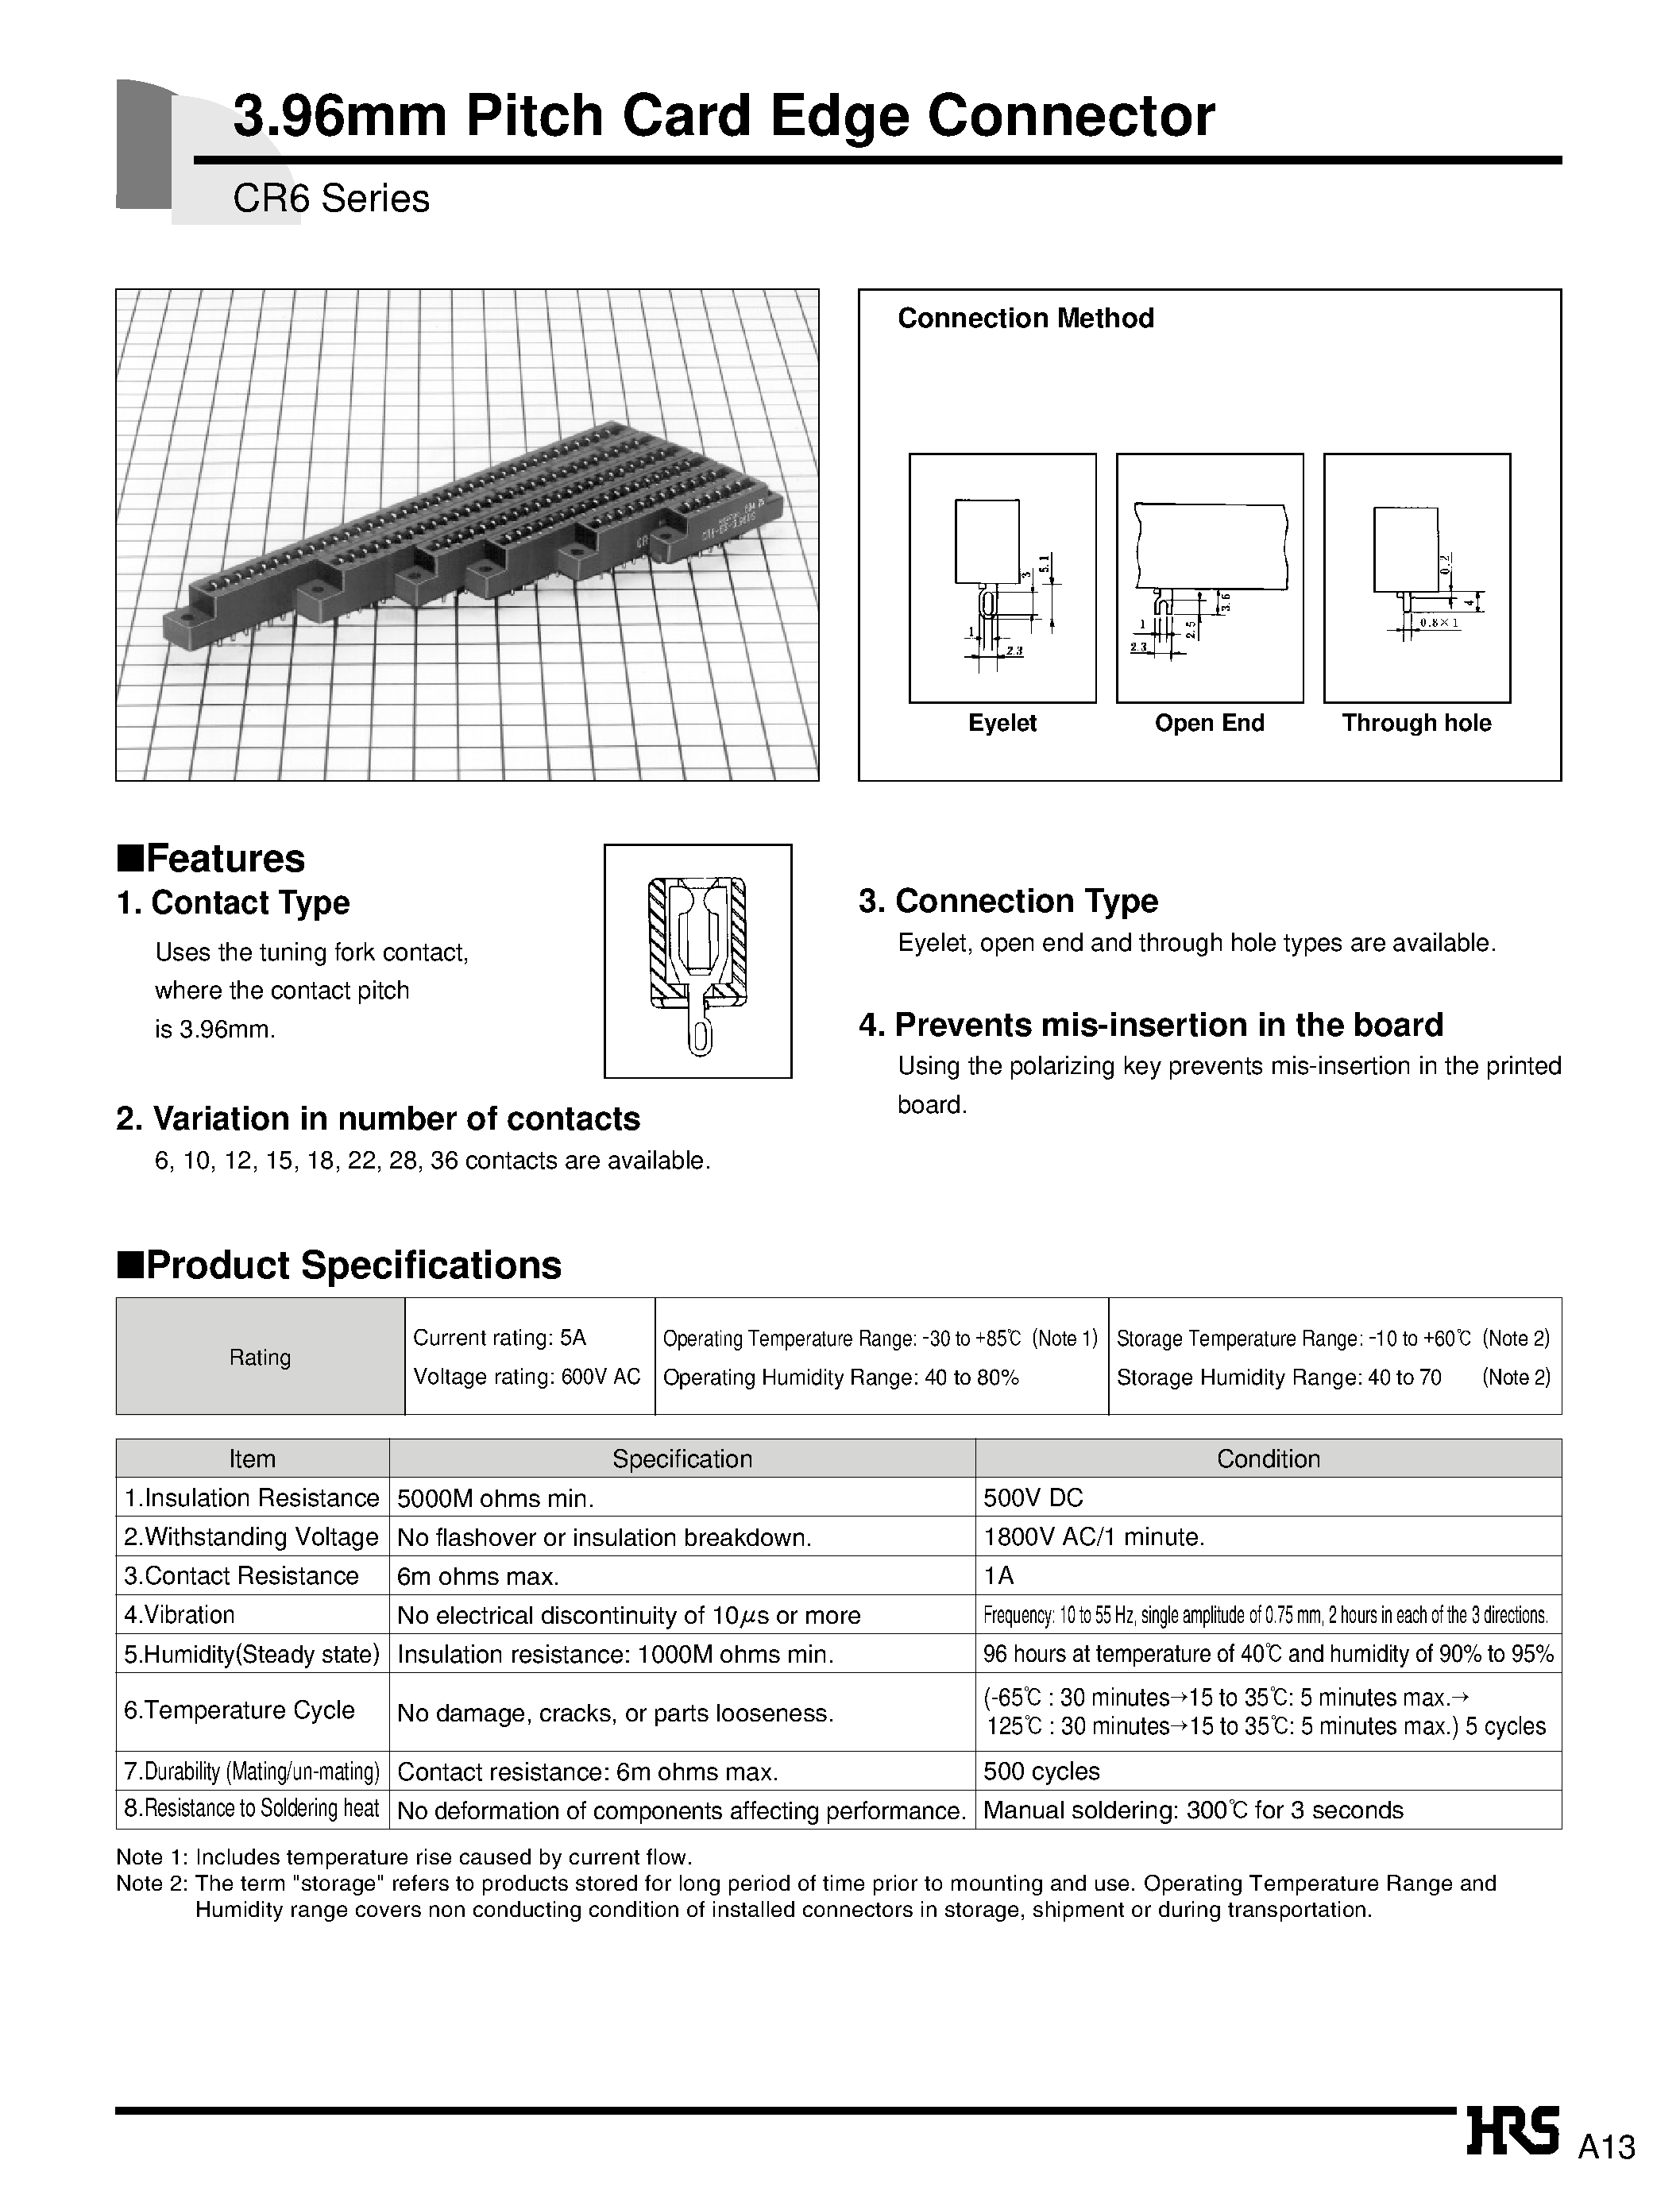 Datasheet CR6-28S-3.96DS - 3.96mm Pitch Card Edge Connector page 1